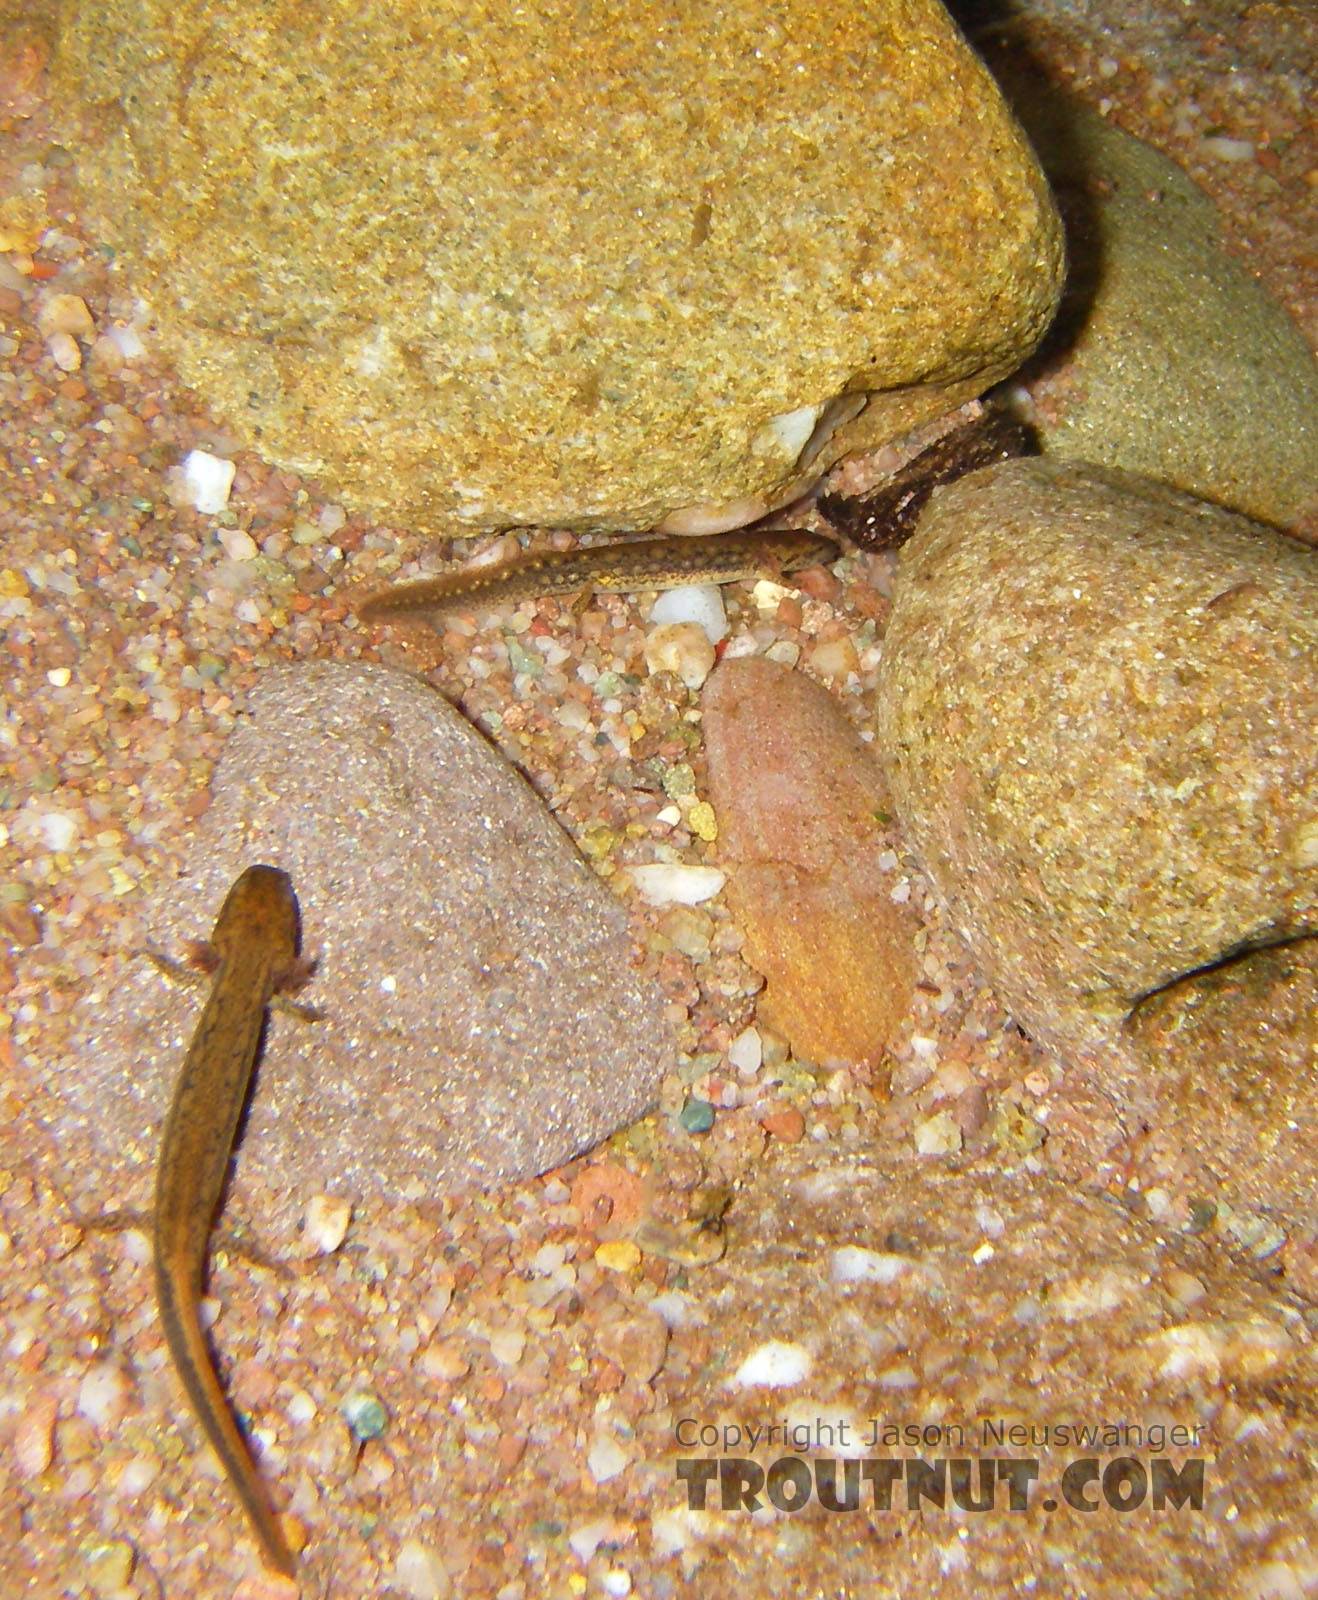 In this picture: Amphibian Order Caudata (Salamanders). From the Mystery Creek # 23 in New York.